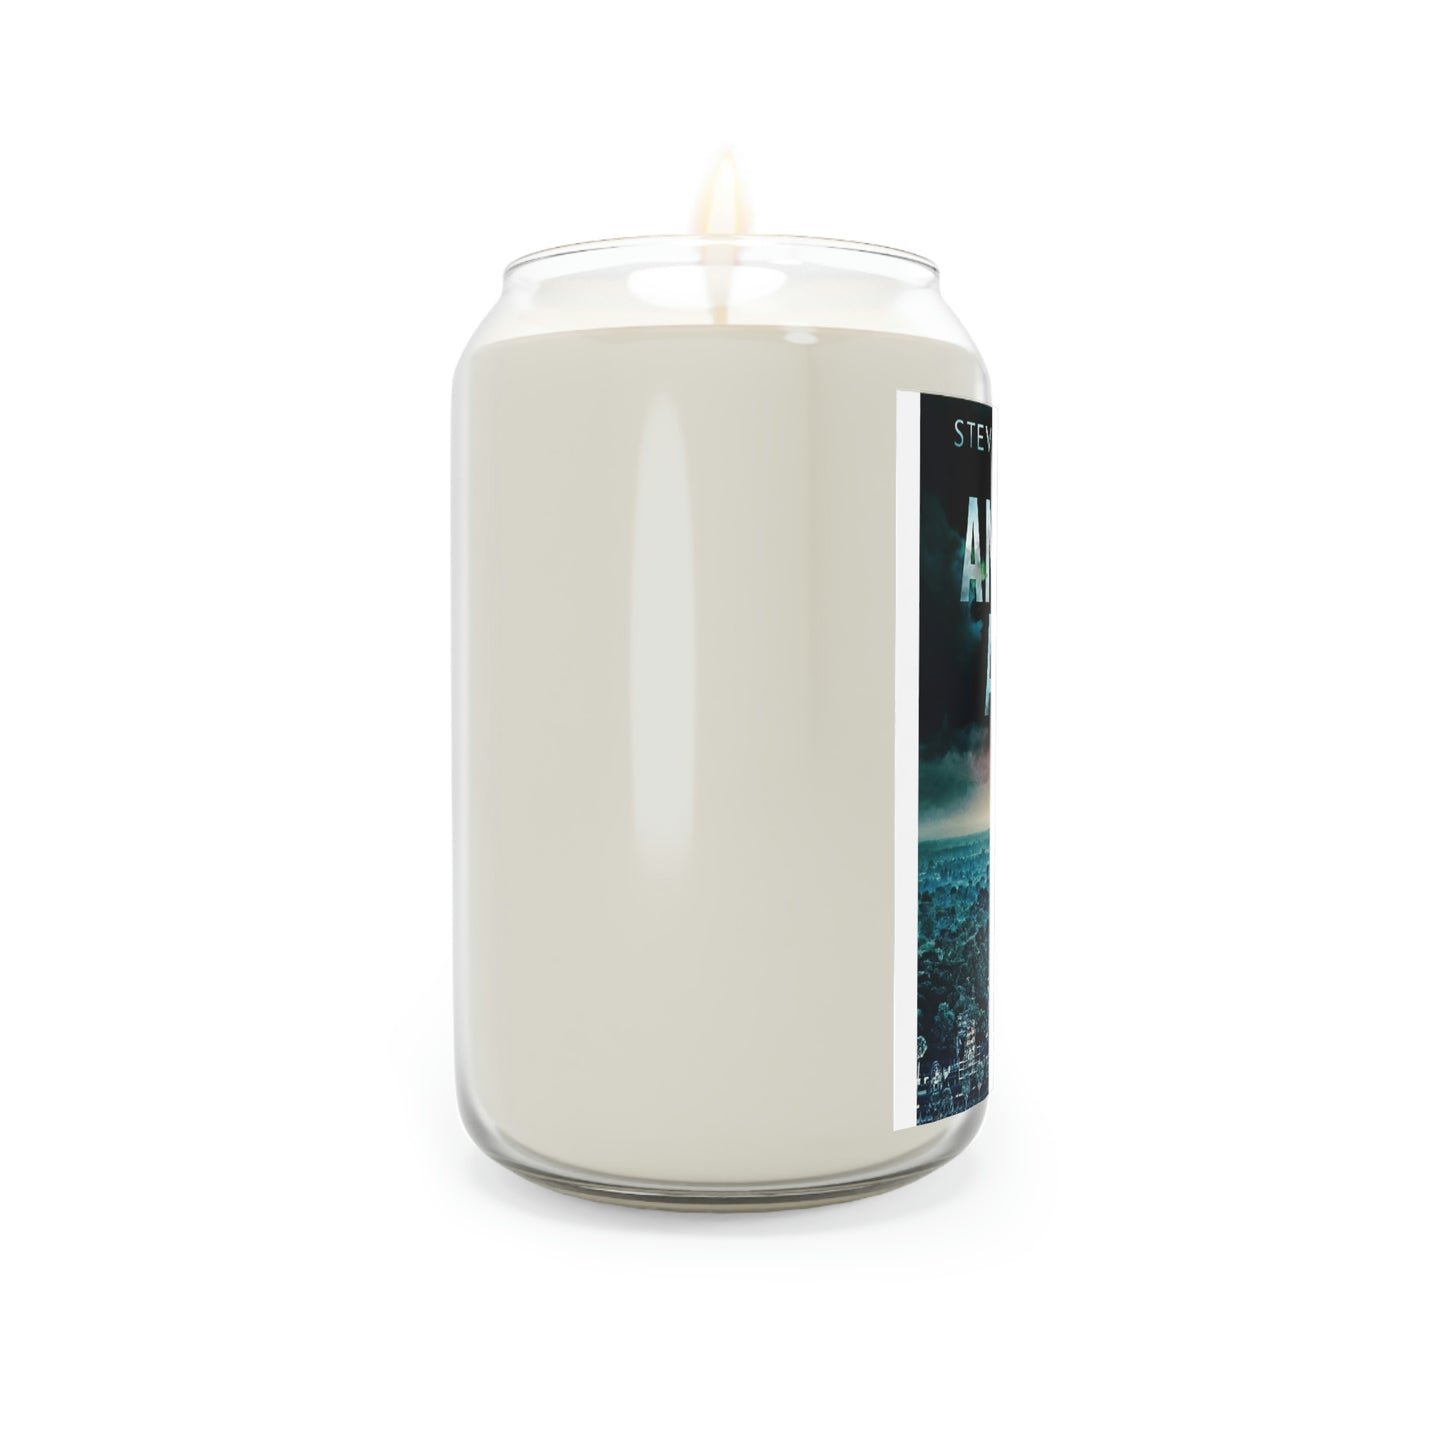 Angkor Away - Scented Candle